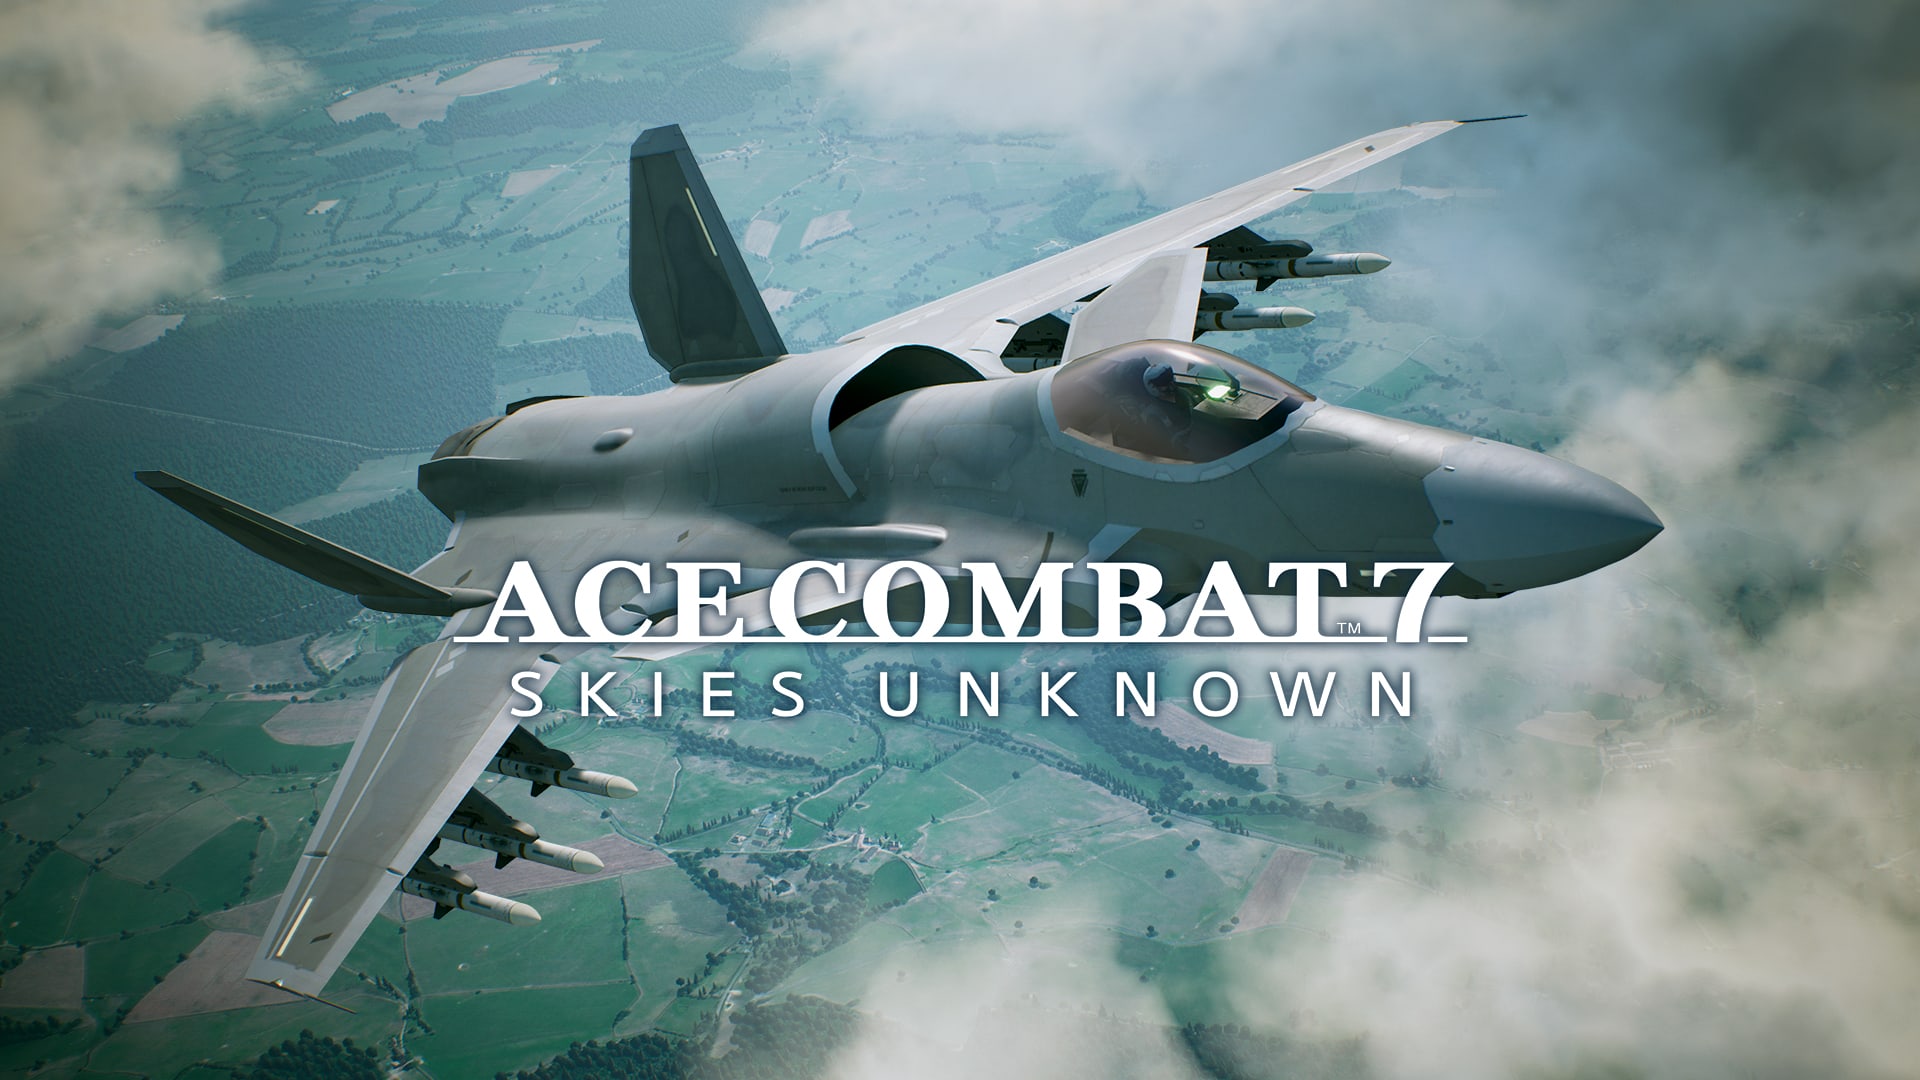 ACE COMBAT™7: SKIES UNKNOWN - ASF-X Shinden II Set 1